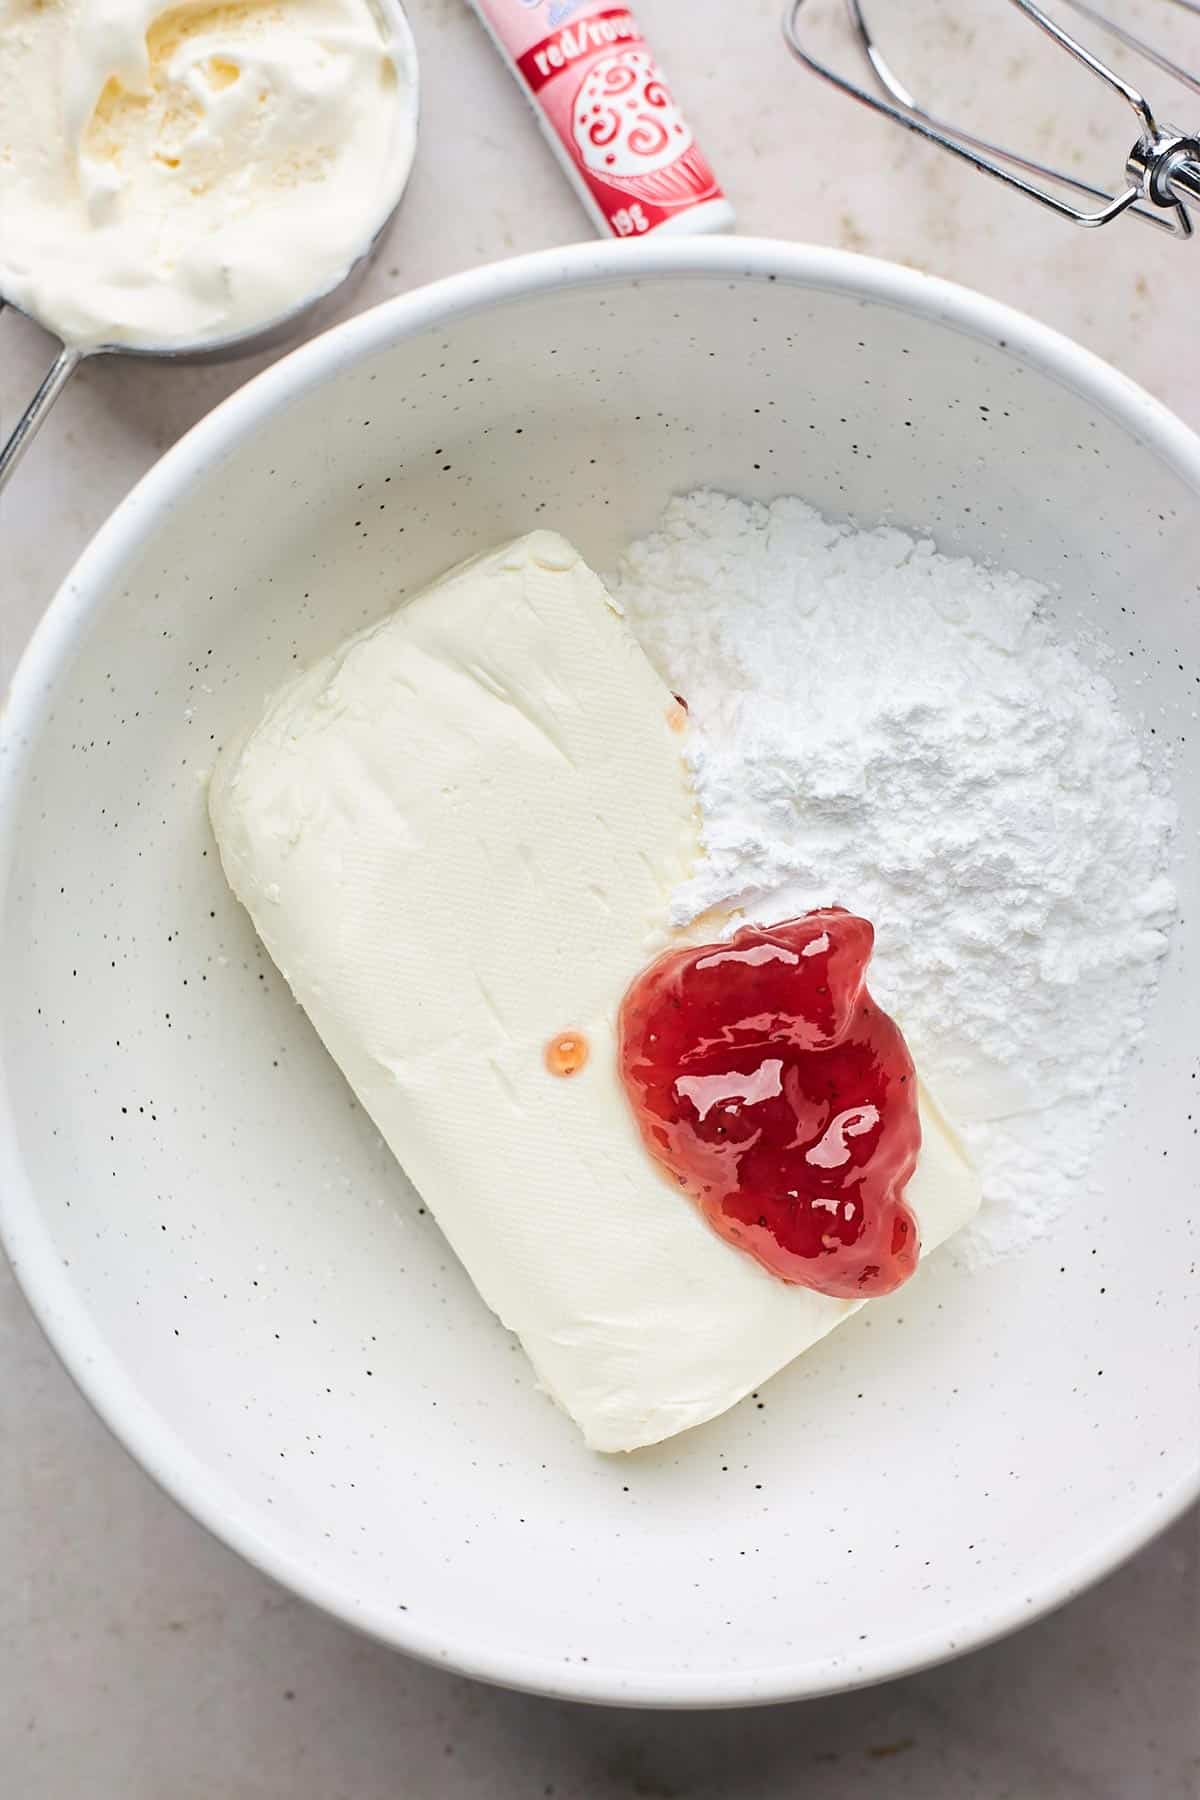 Powdered sugar, cream cheese, and strawberry in a mixing bowl.